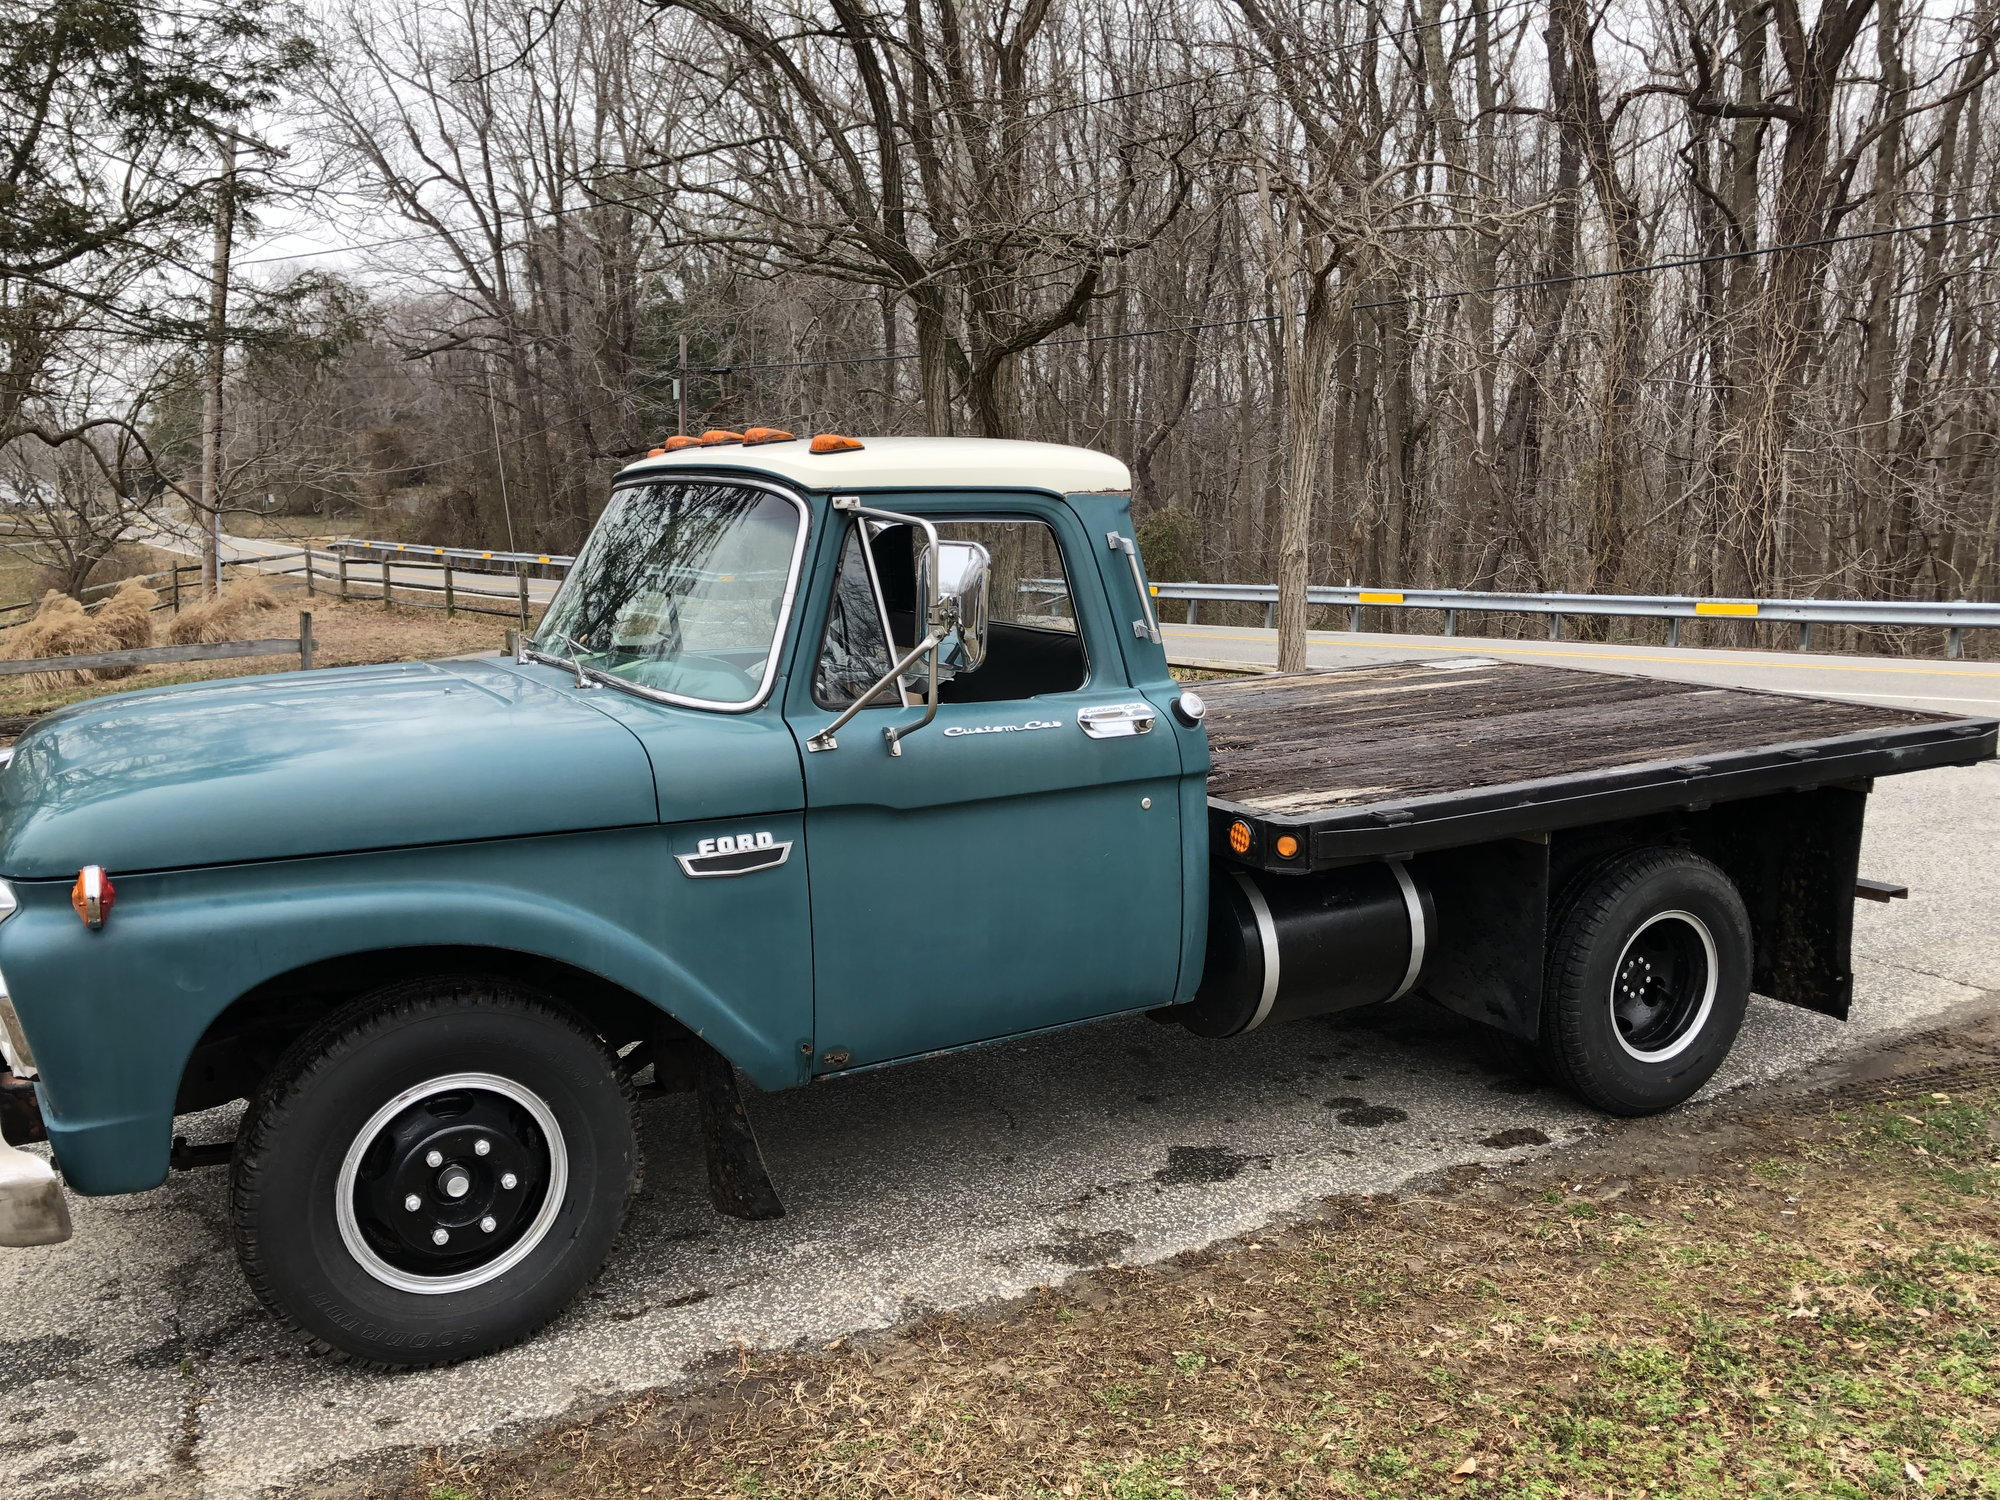 66 f350 - Ford Truck Enthusiasts Forums